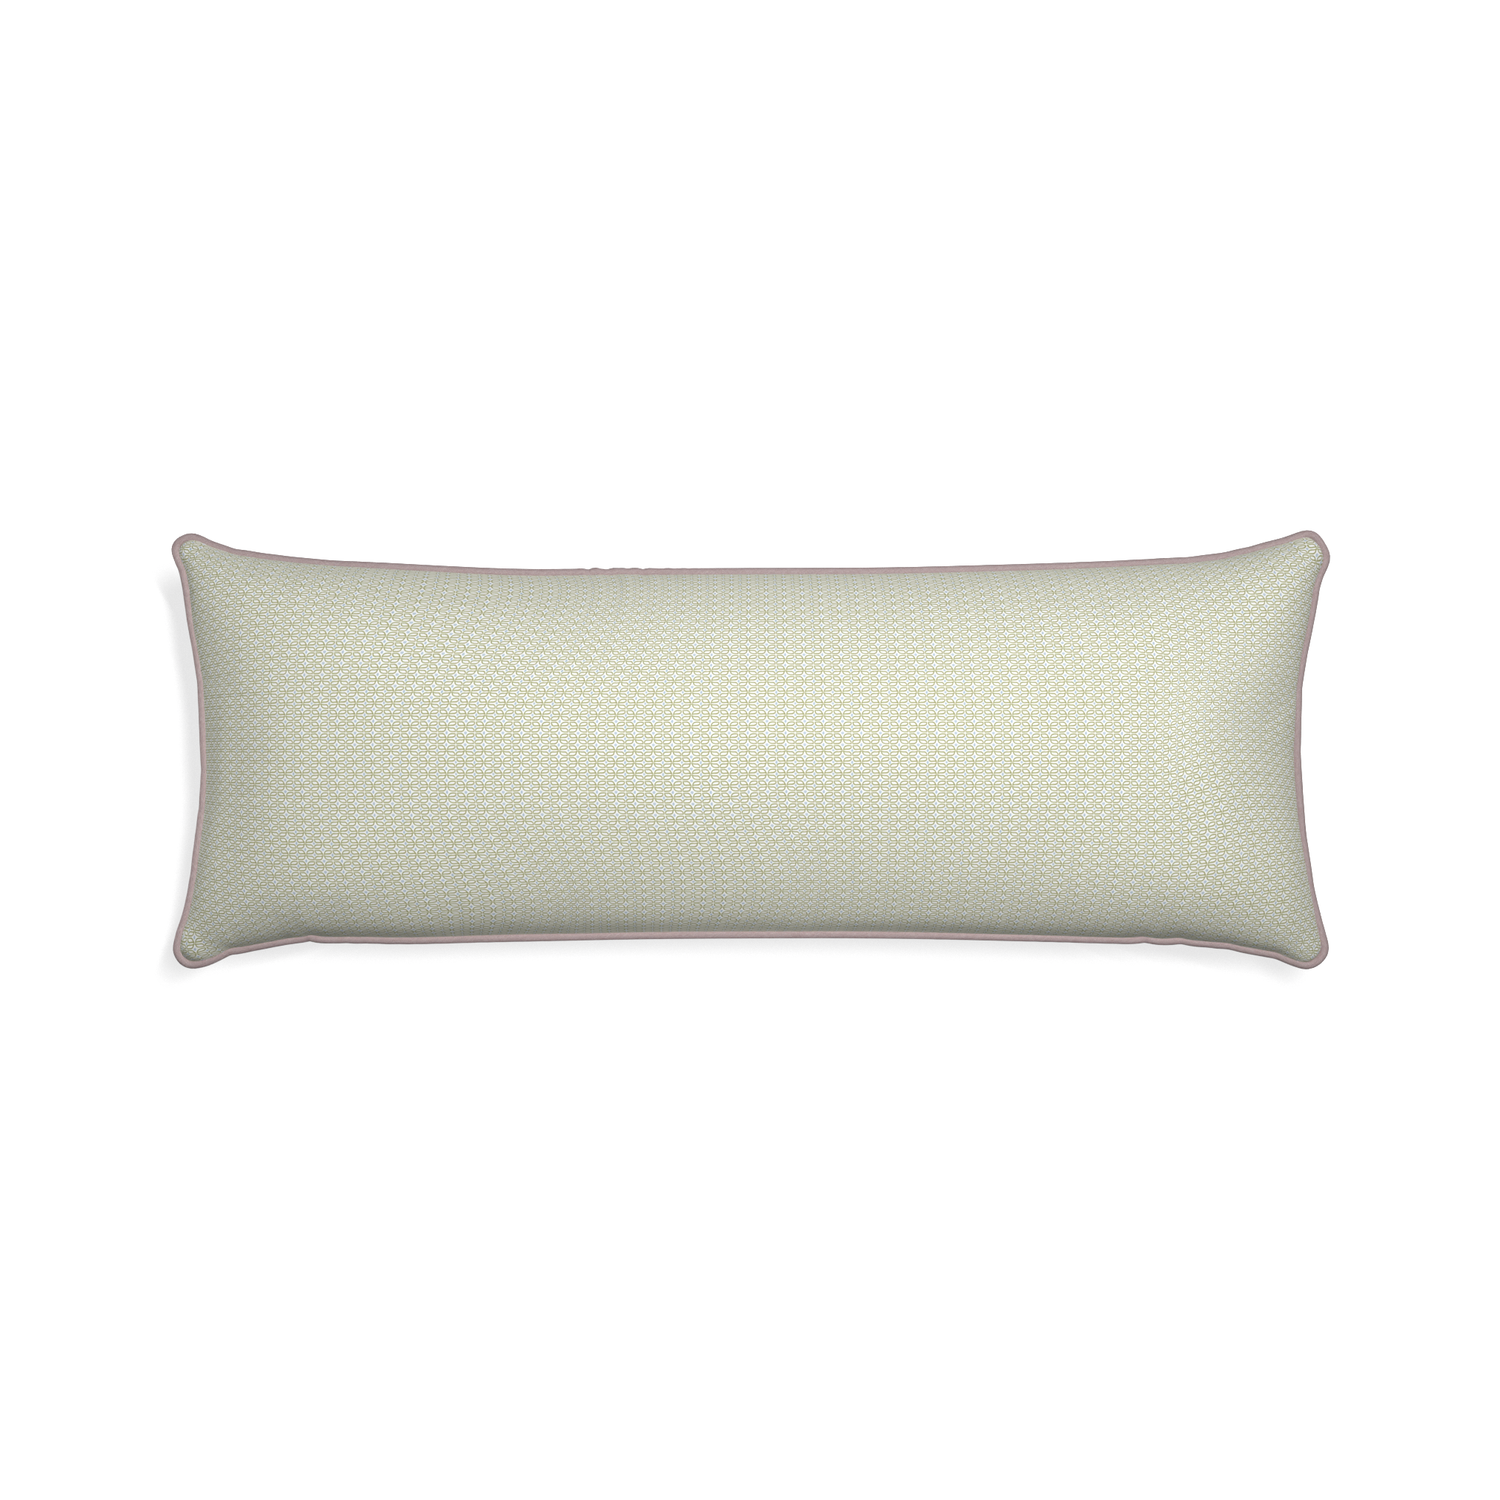 Xl-lumbar loomi moss custom moss green geometricpillow with orchid piping on white background